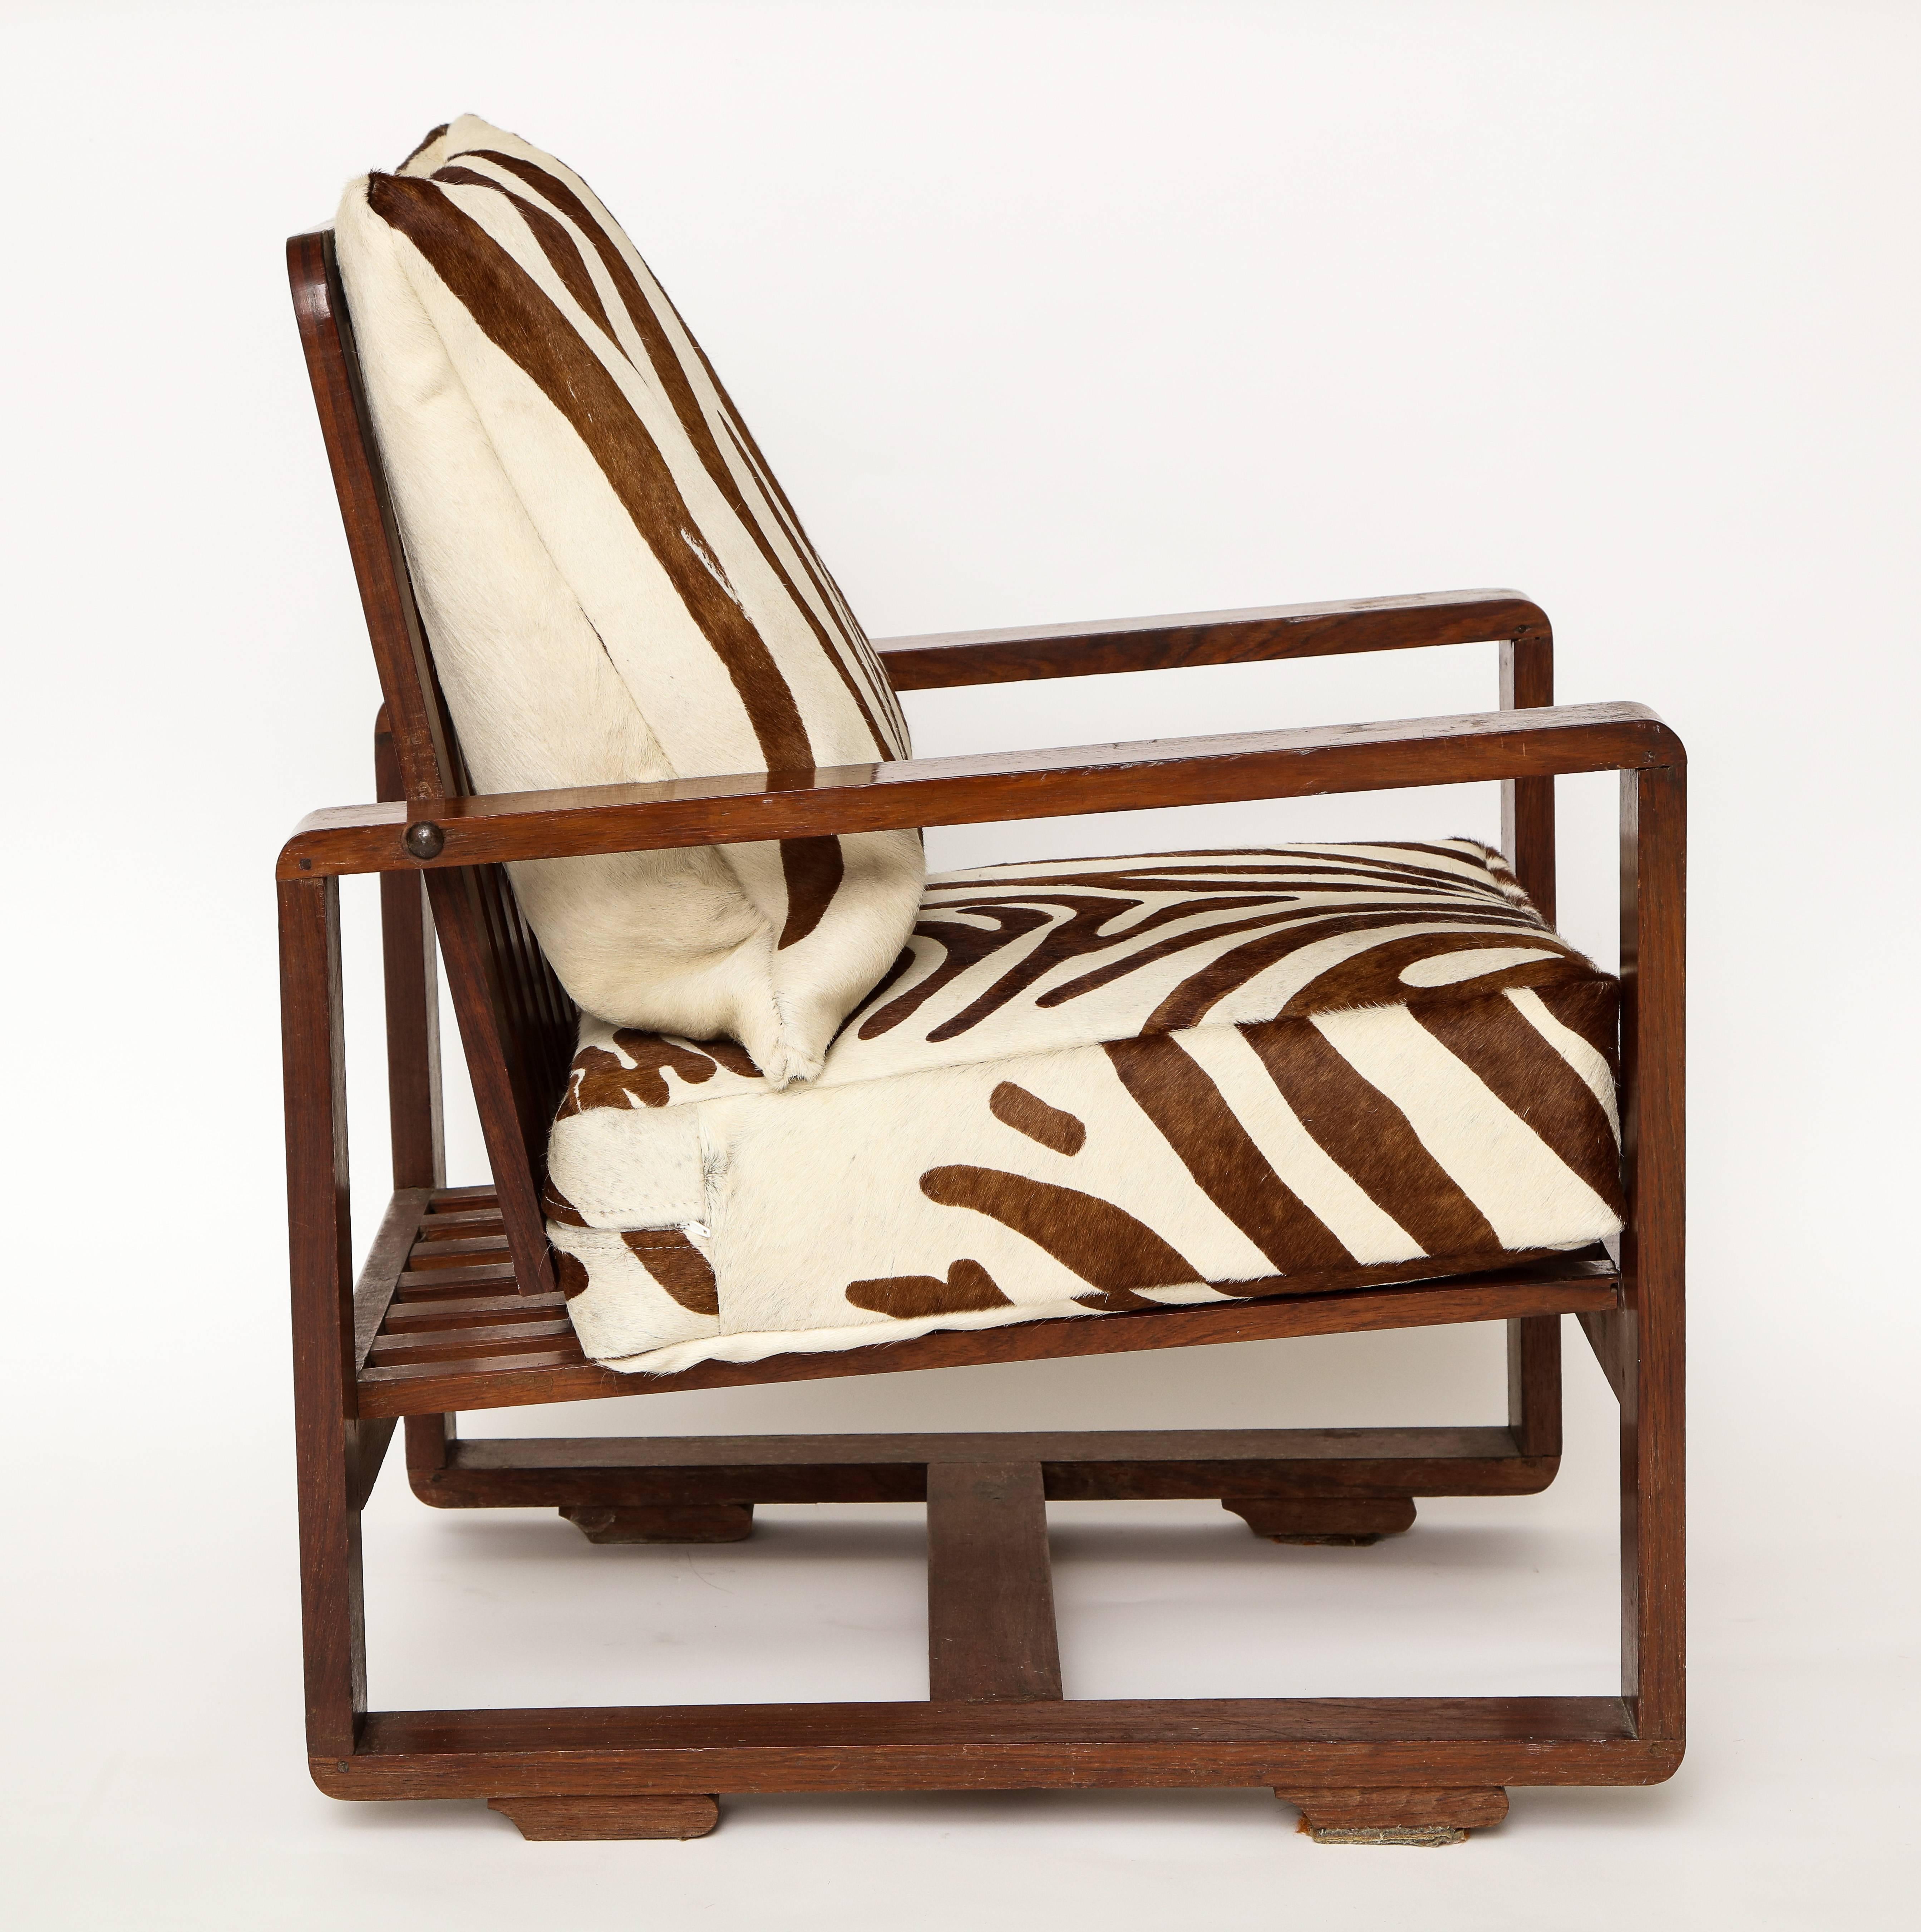 Sornay Attr. Art Deco Rosewood Lounge Chairs, France 1930s-1940s, Mid-Century In Good Condition For Sale In New York, NY